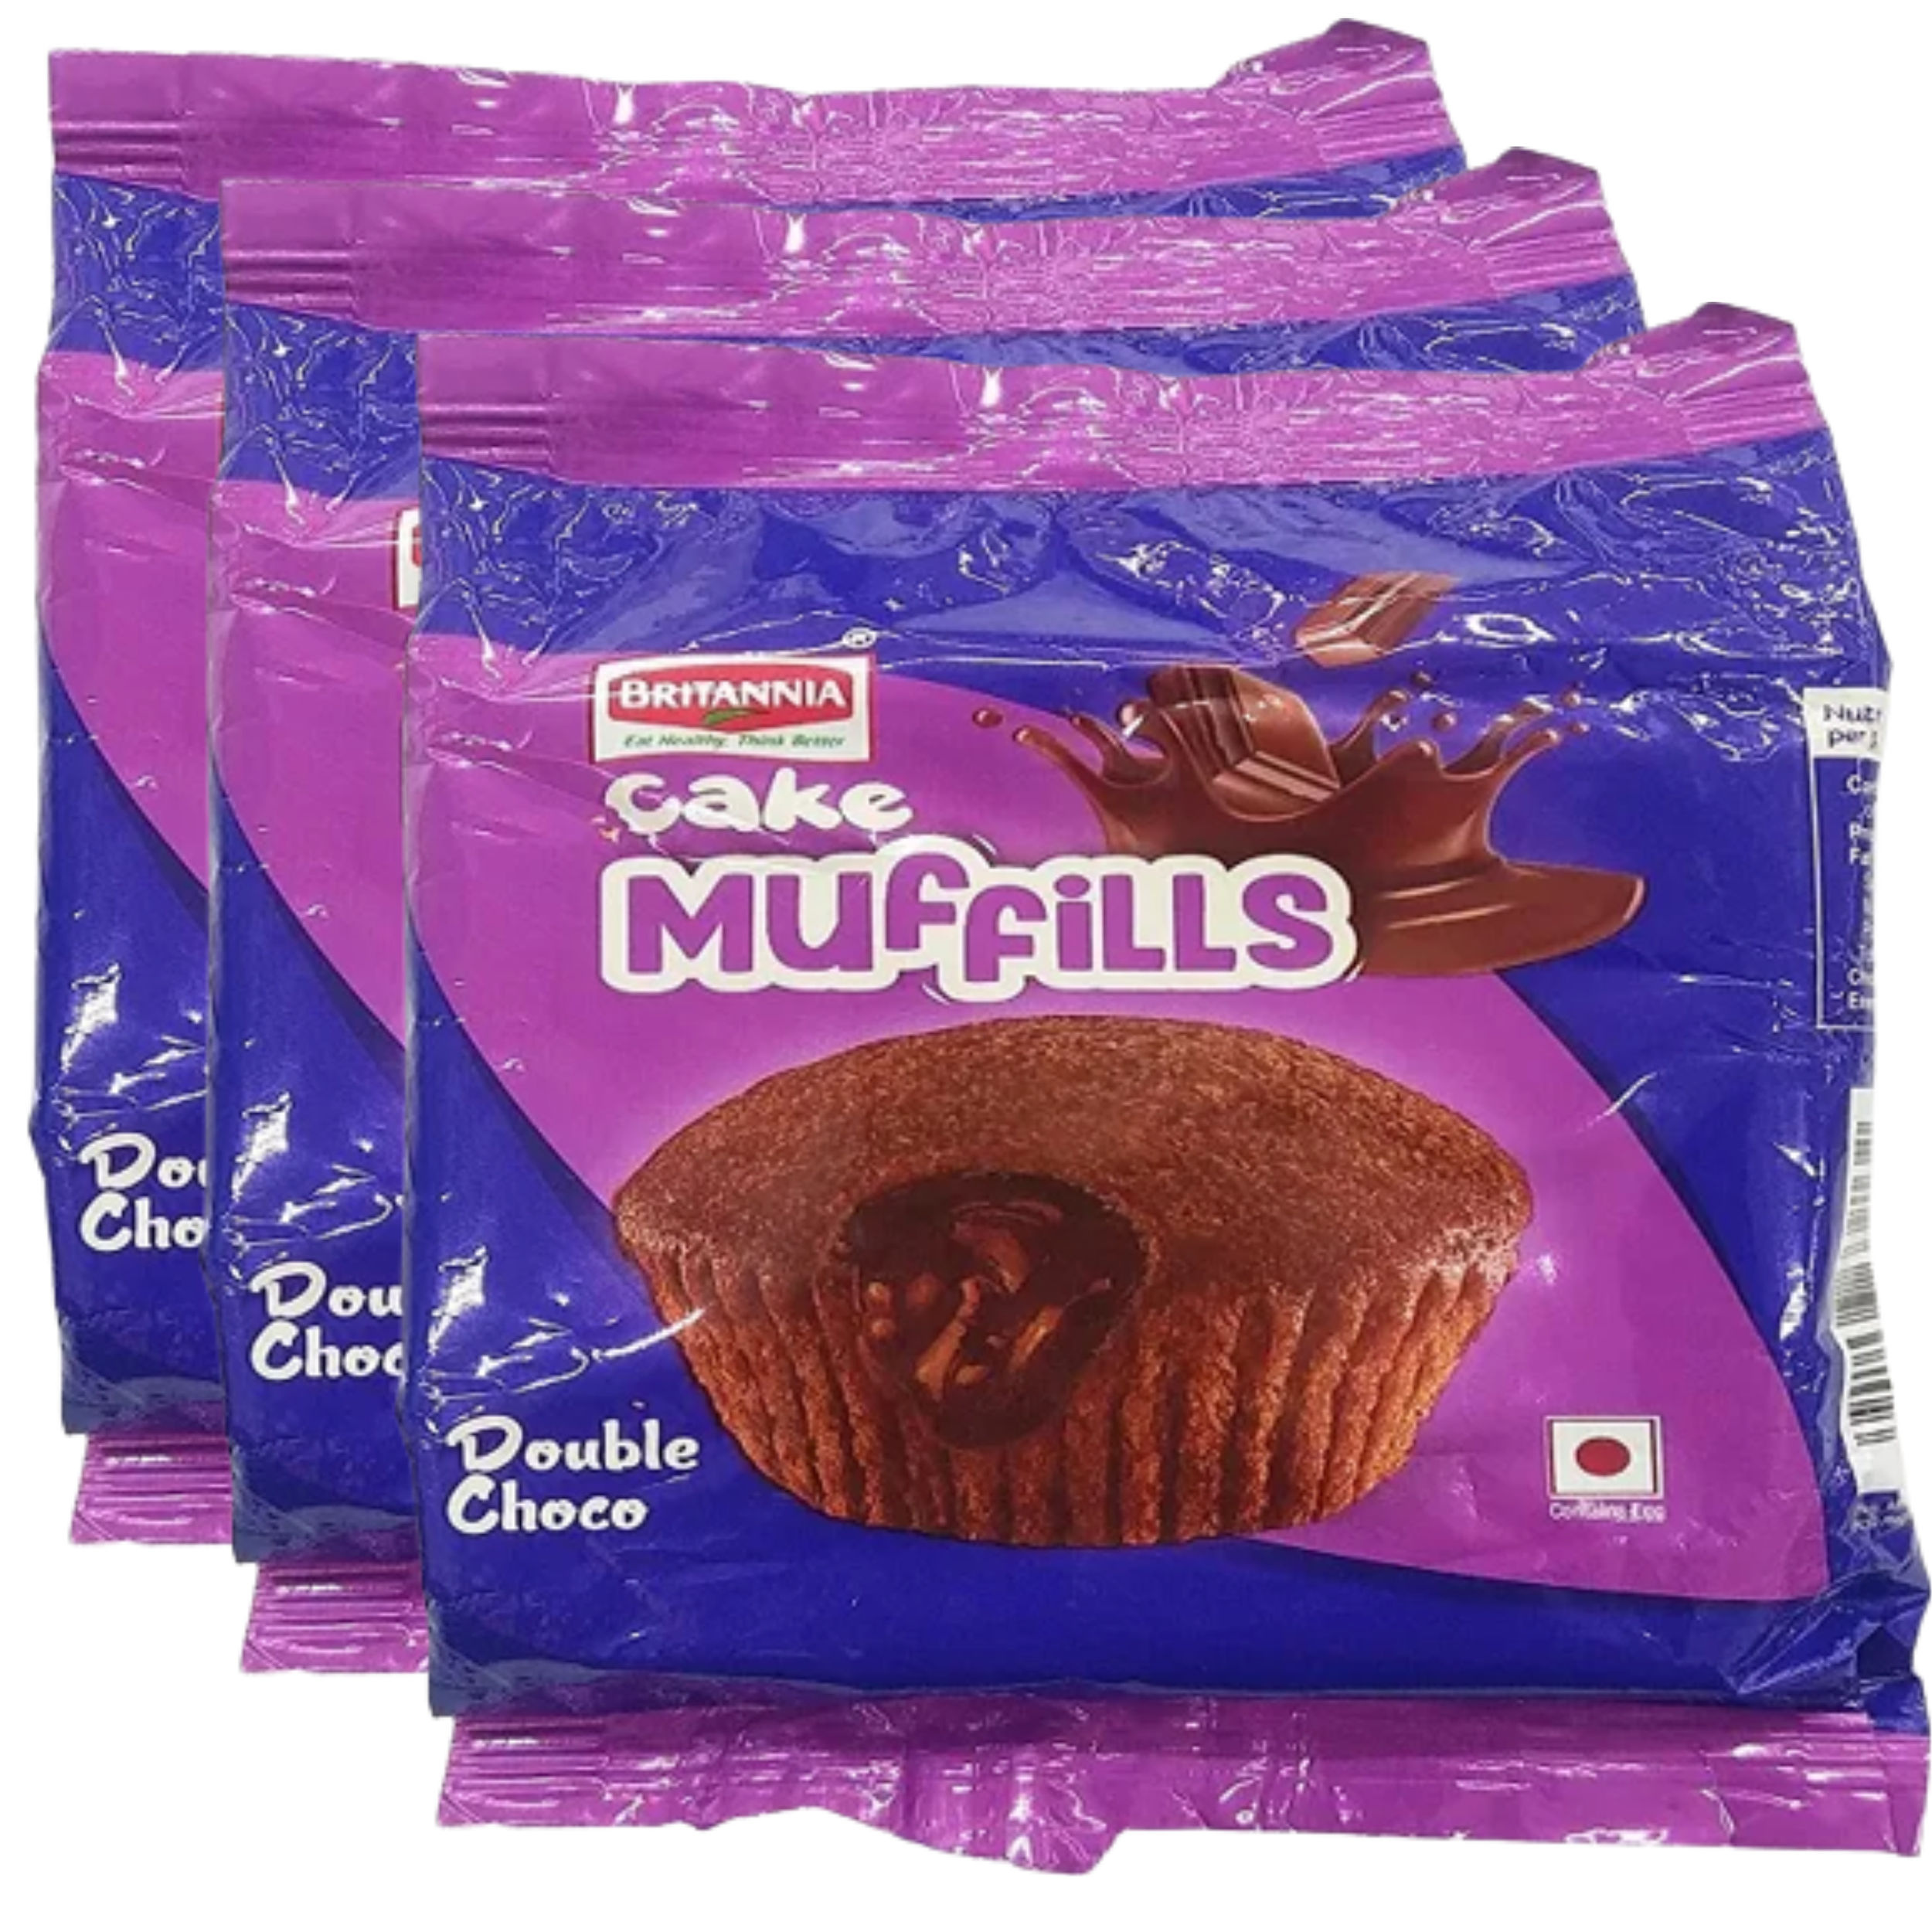 Britannia Cake Muffills - Double Choco, 32g : Amazon.in: Grocery & Gourmet  Foods